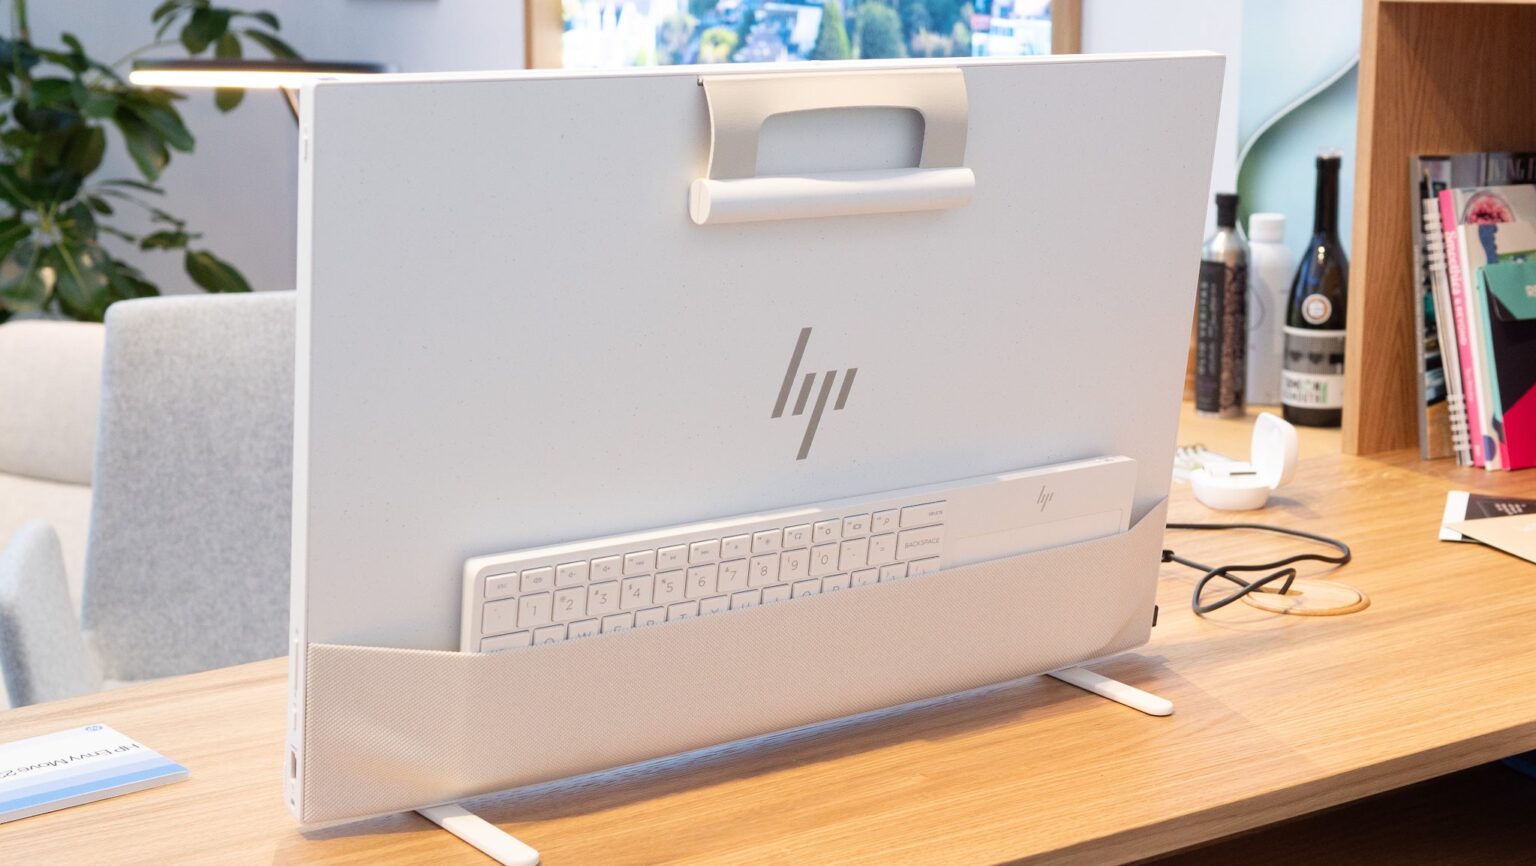 Innovative Design: HP Envy Move All-in-one Desktop Review